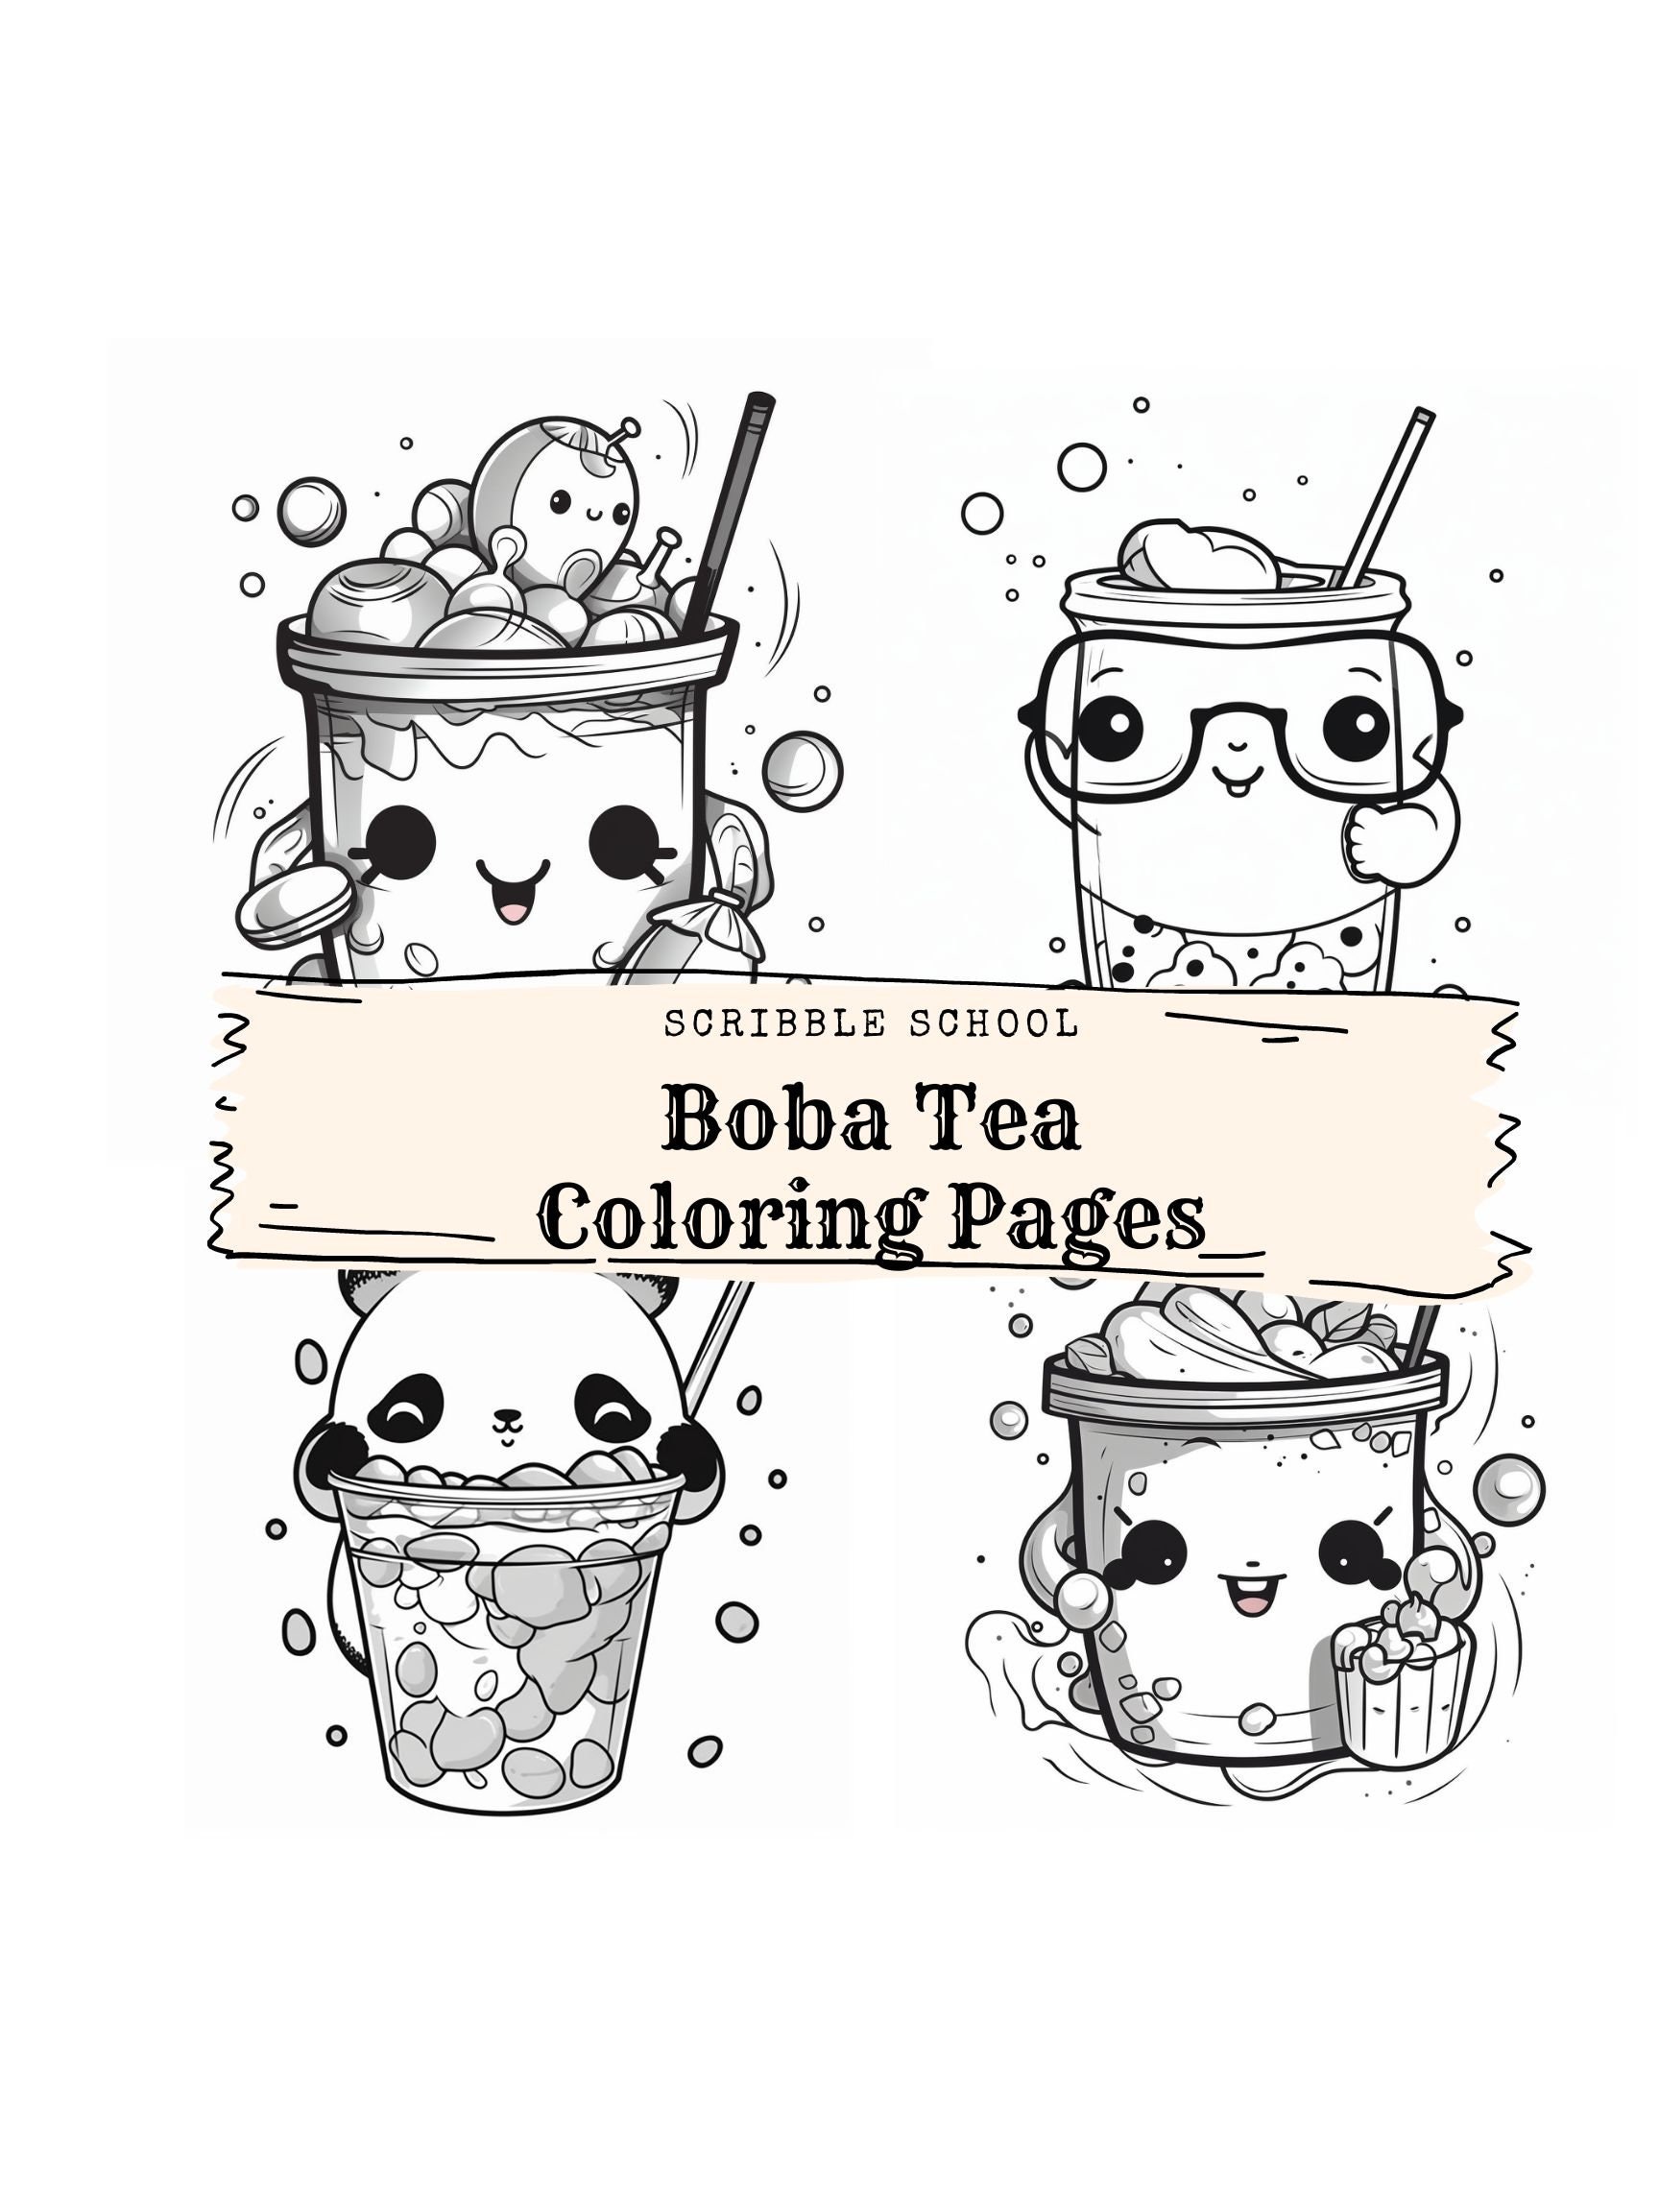 Boba tea coloring pages download now